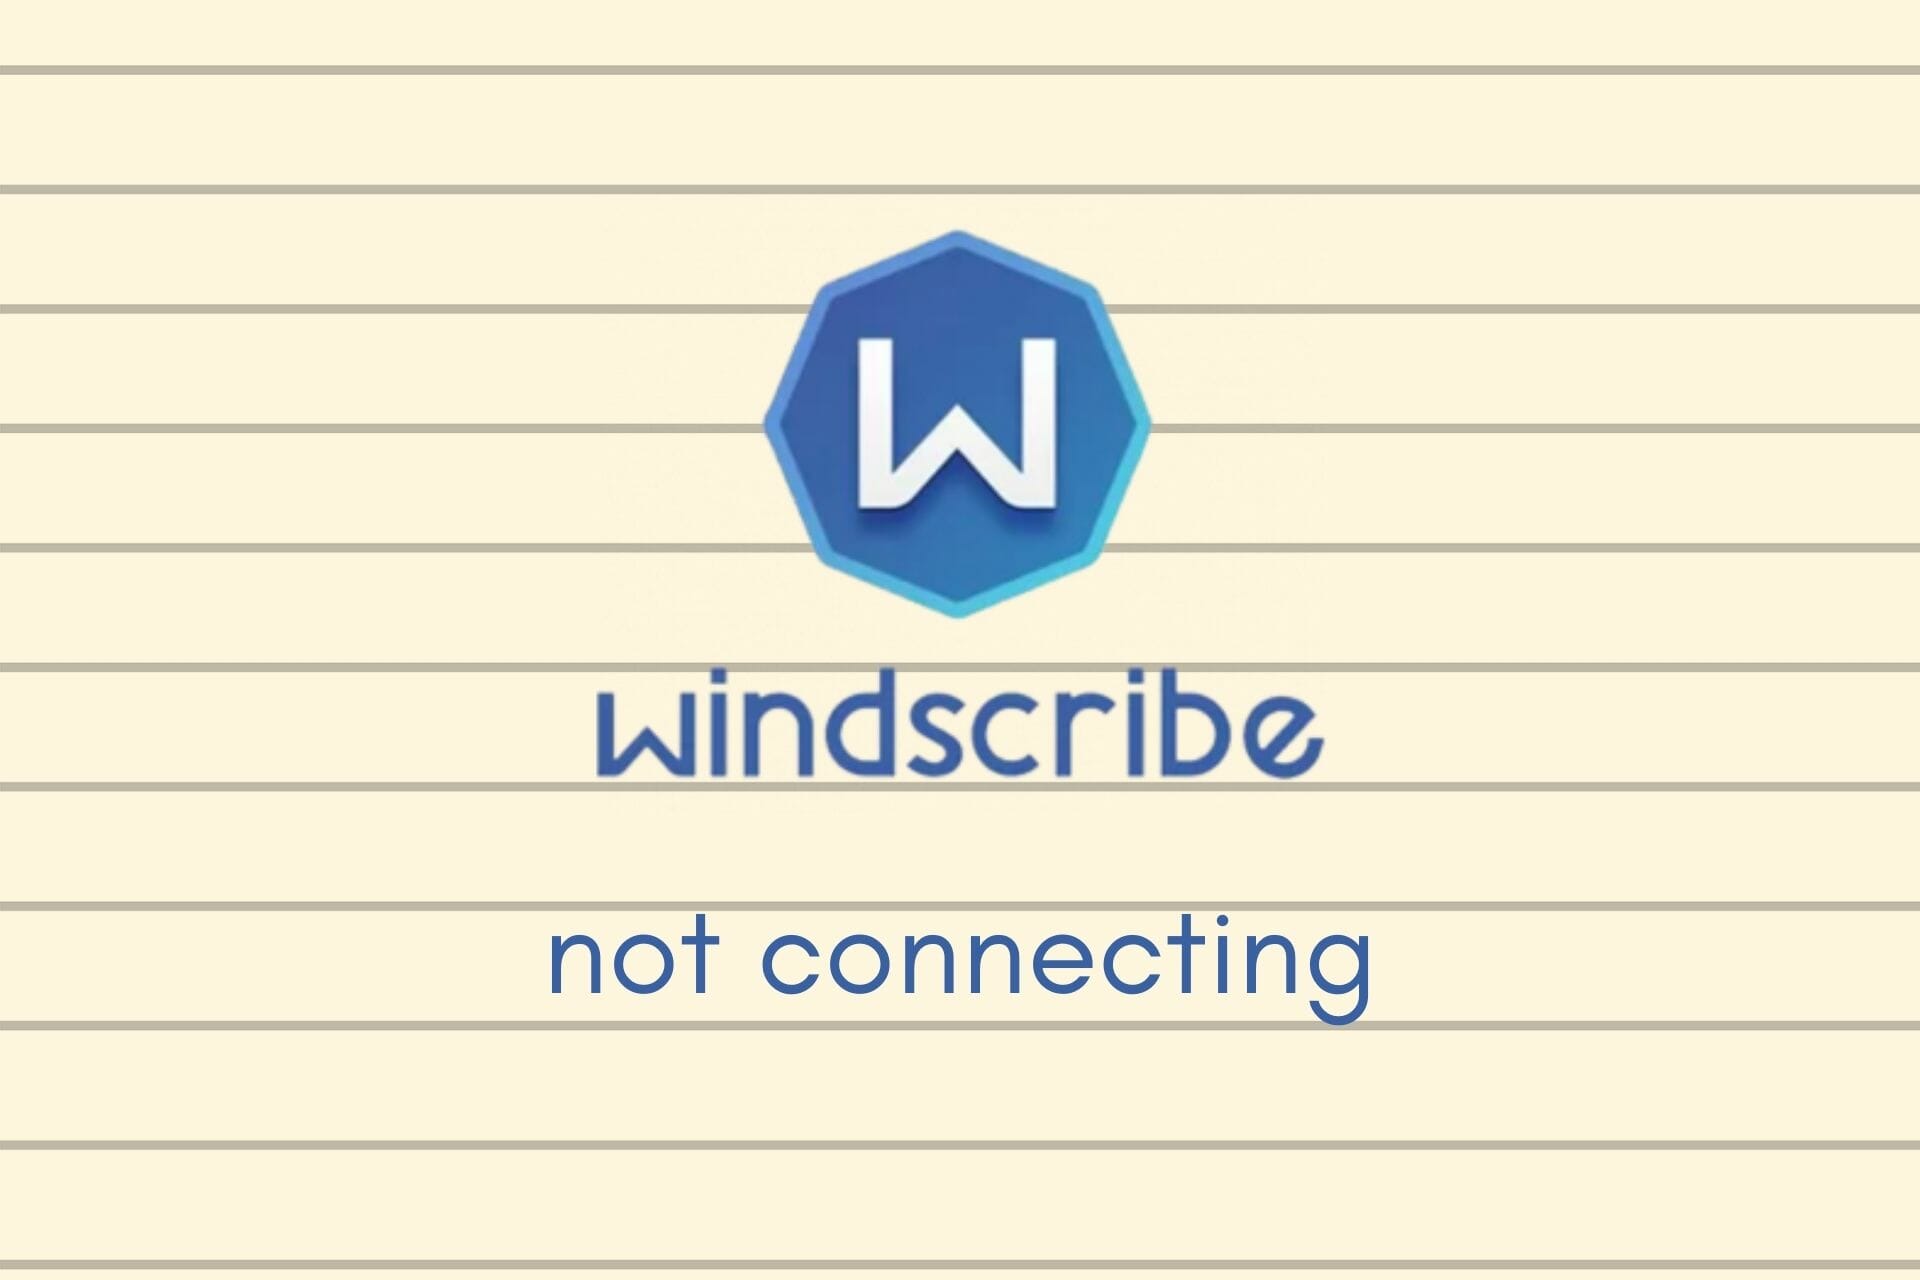 Windscribe not connecting